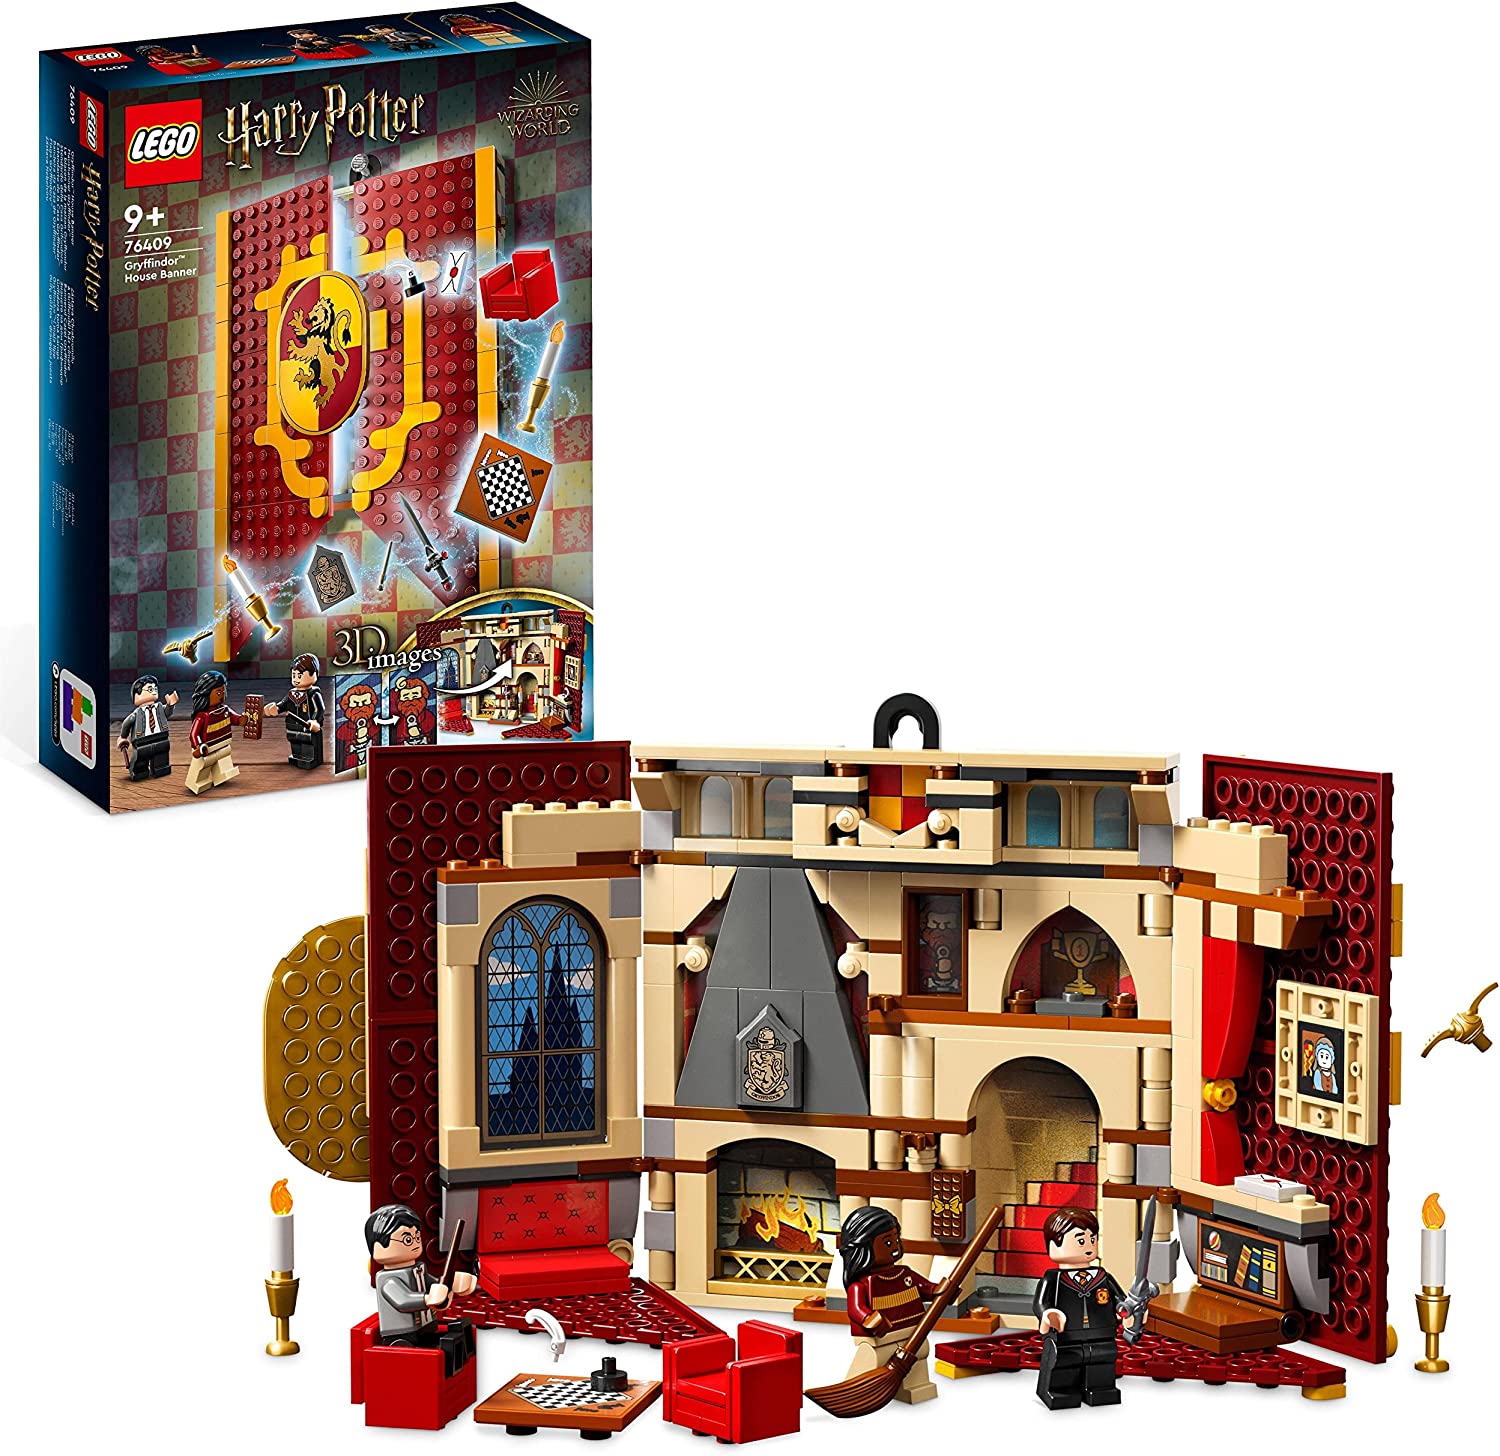 LEGO 76409 Harry Potter House Banner Gryffindor Set, Hogwarts Coat of Arms, Castle Community Room Toy or Wall Display, Hunged Travel Toy, Collectable with 3 Mini figures